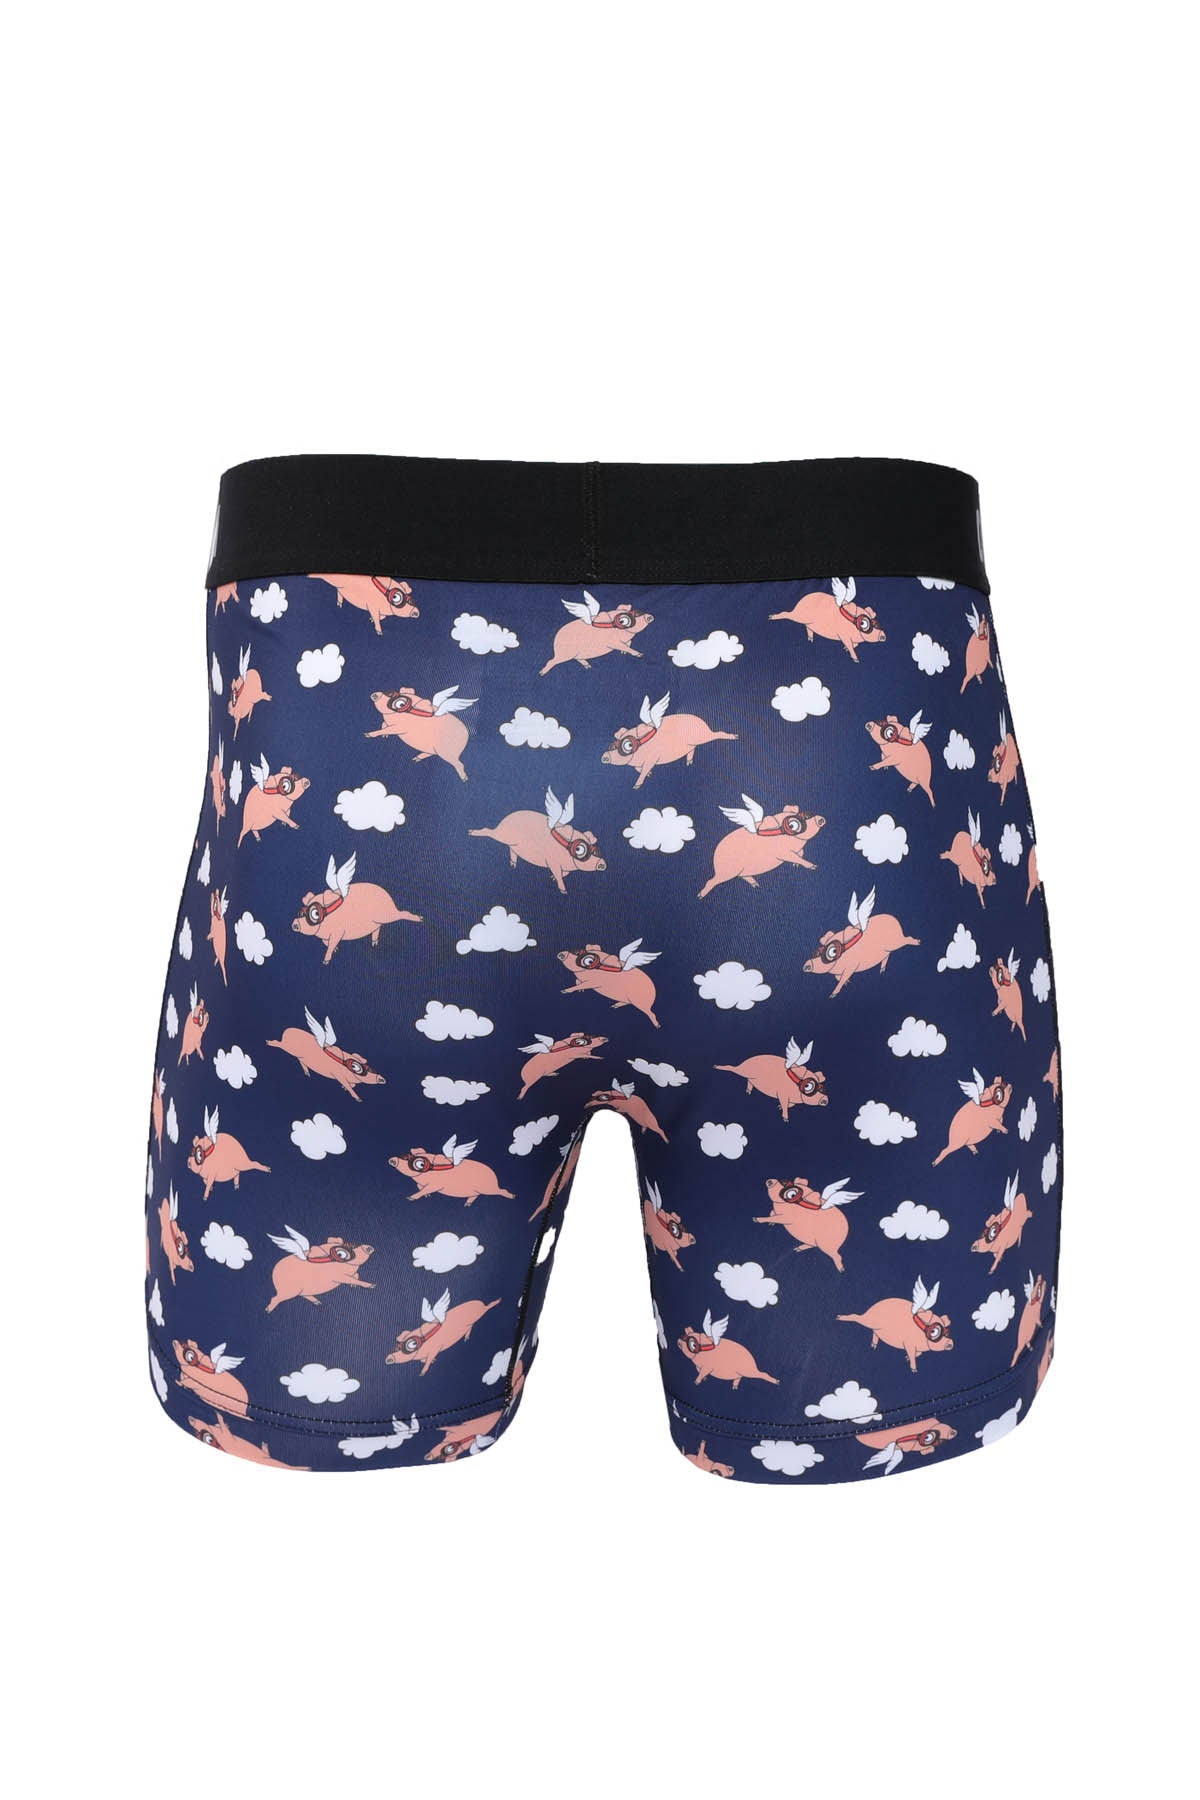 Cinch Mens 6" WHEN PIGS FLY Boxer Briefs